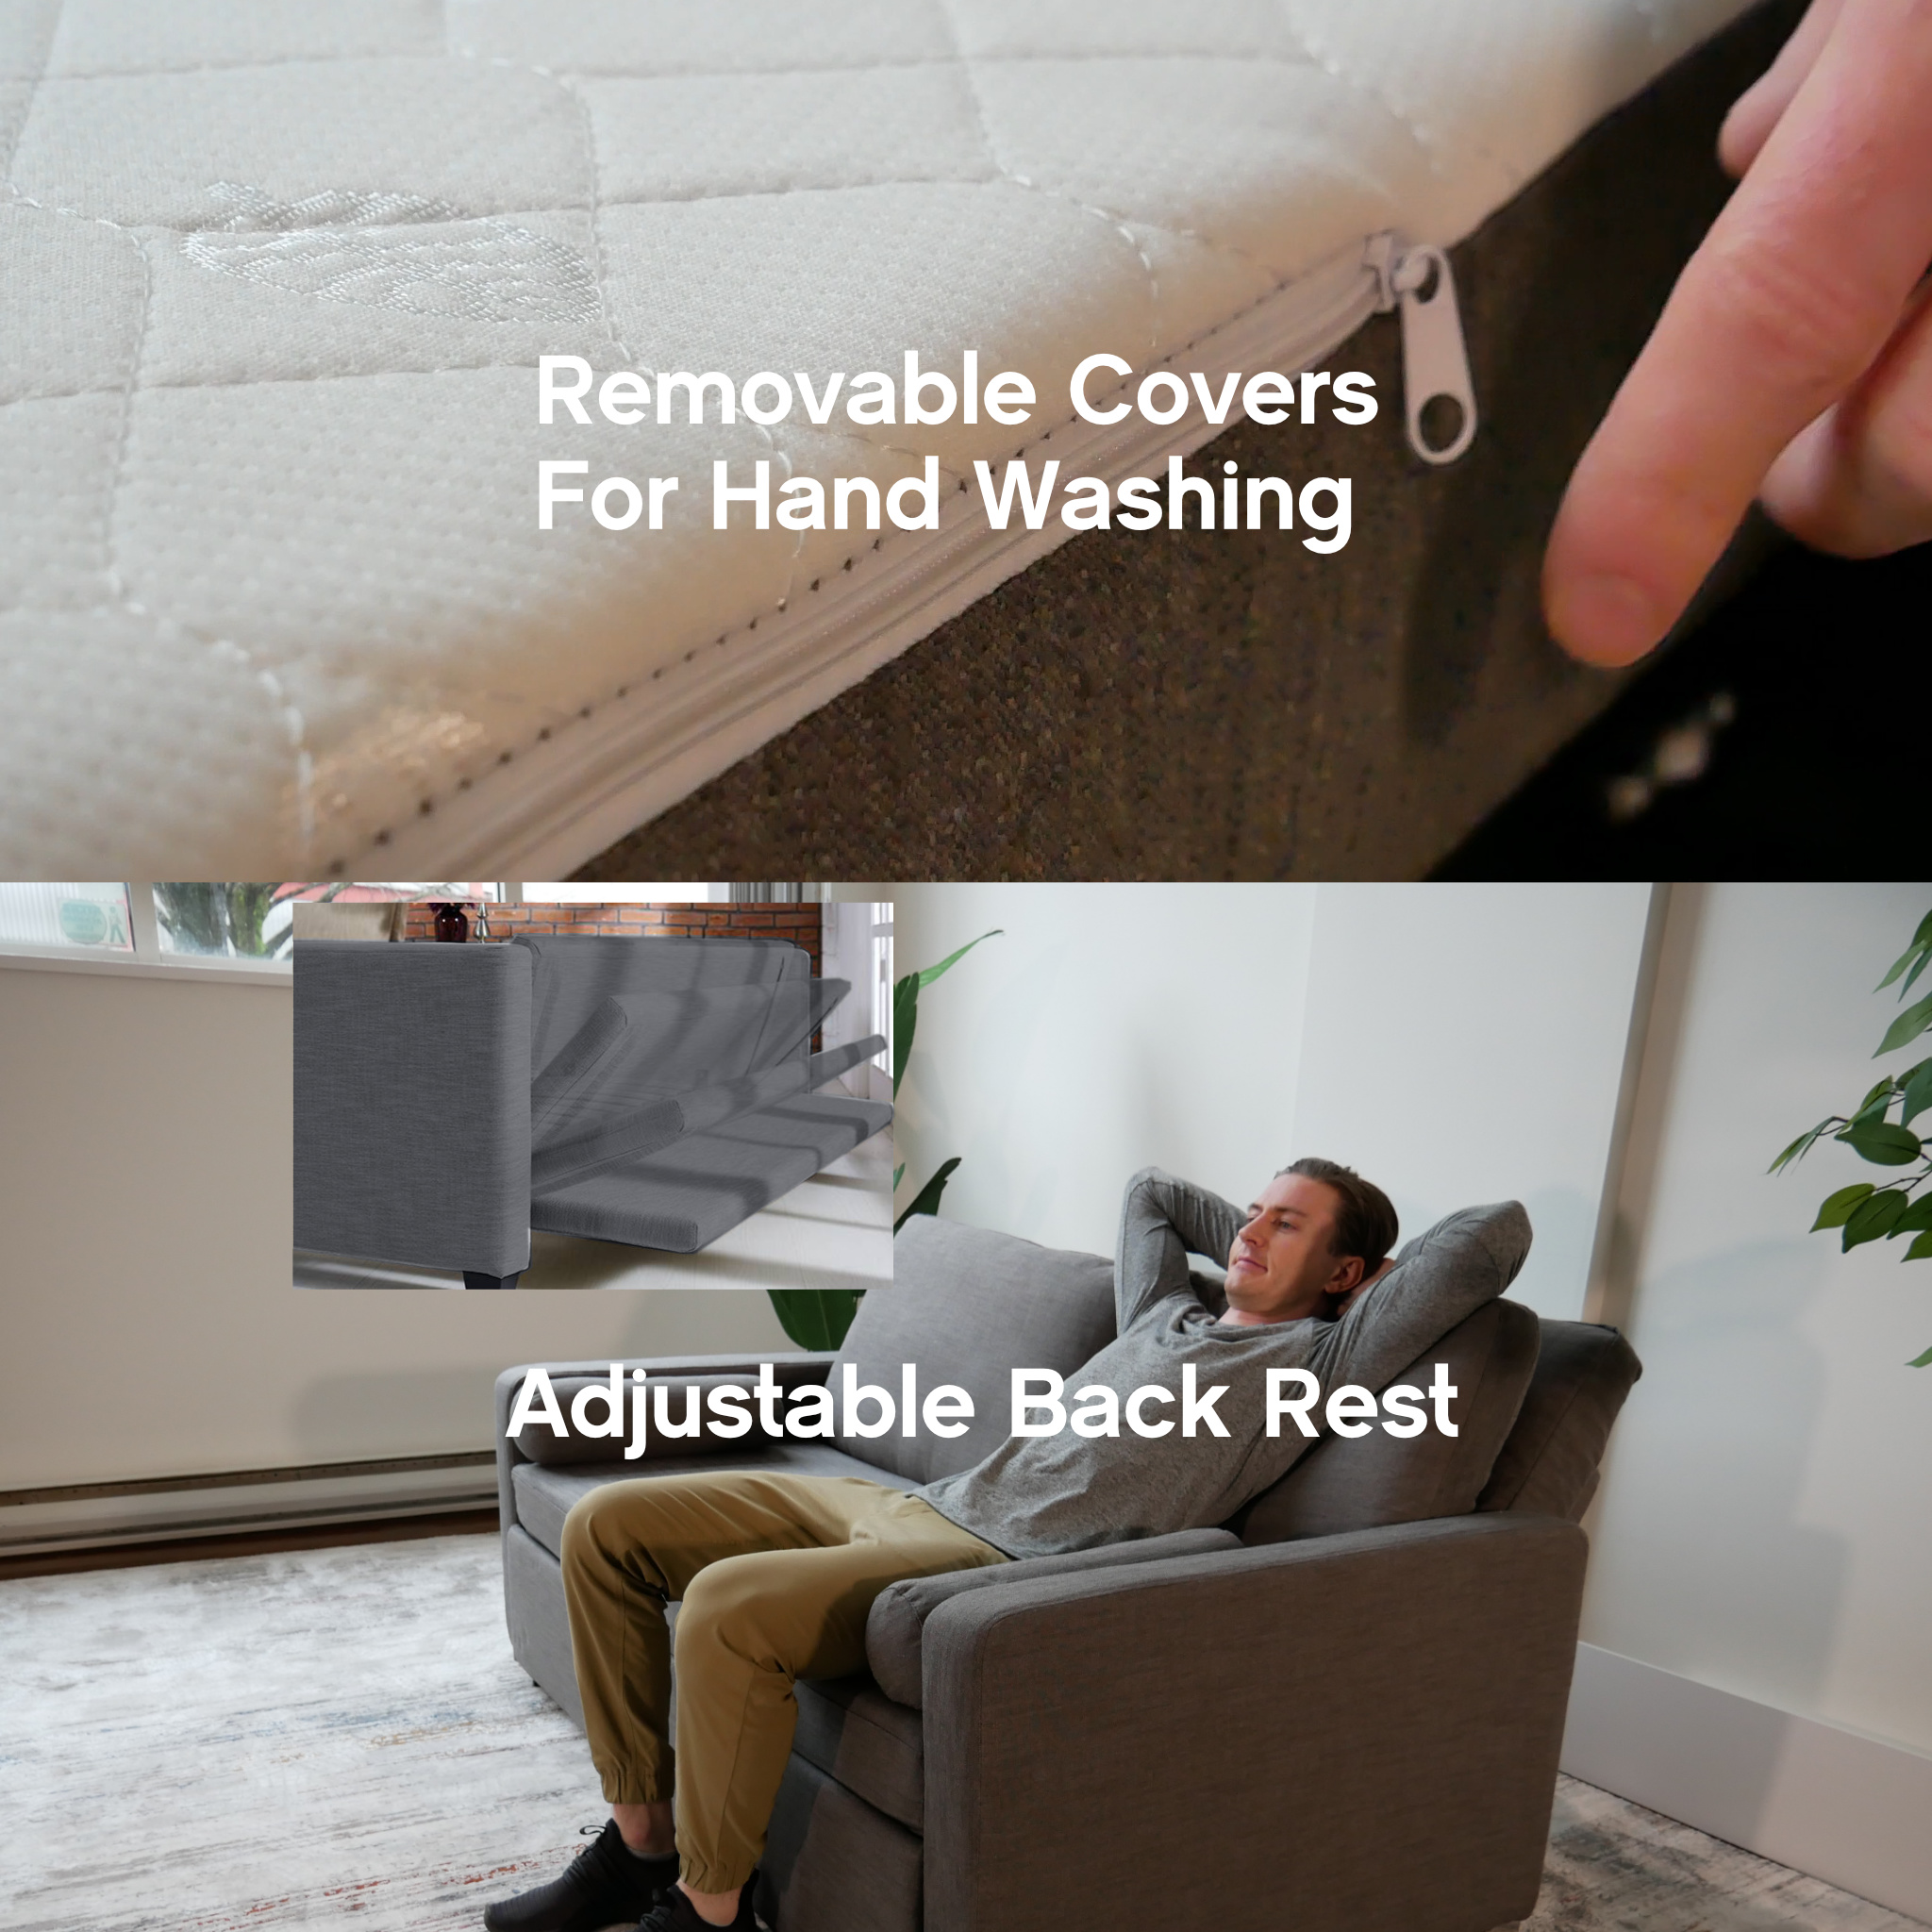 https://expandfurniture.com/wp-content/uploads/2015/06/Harmony-Sofa-has-removable-covers-for-washing-and-an-adjustable-backrest.jpg